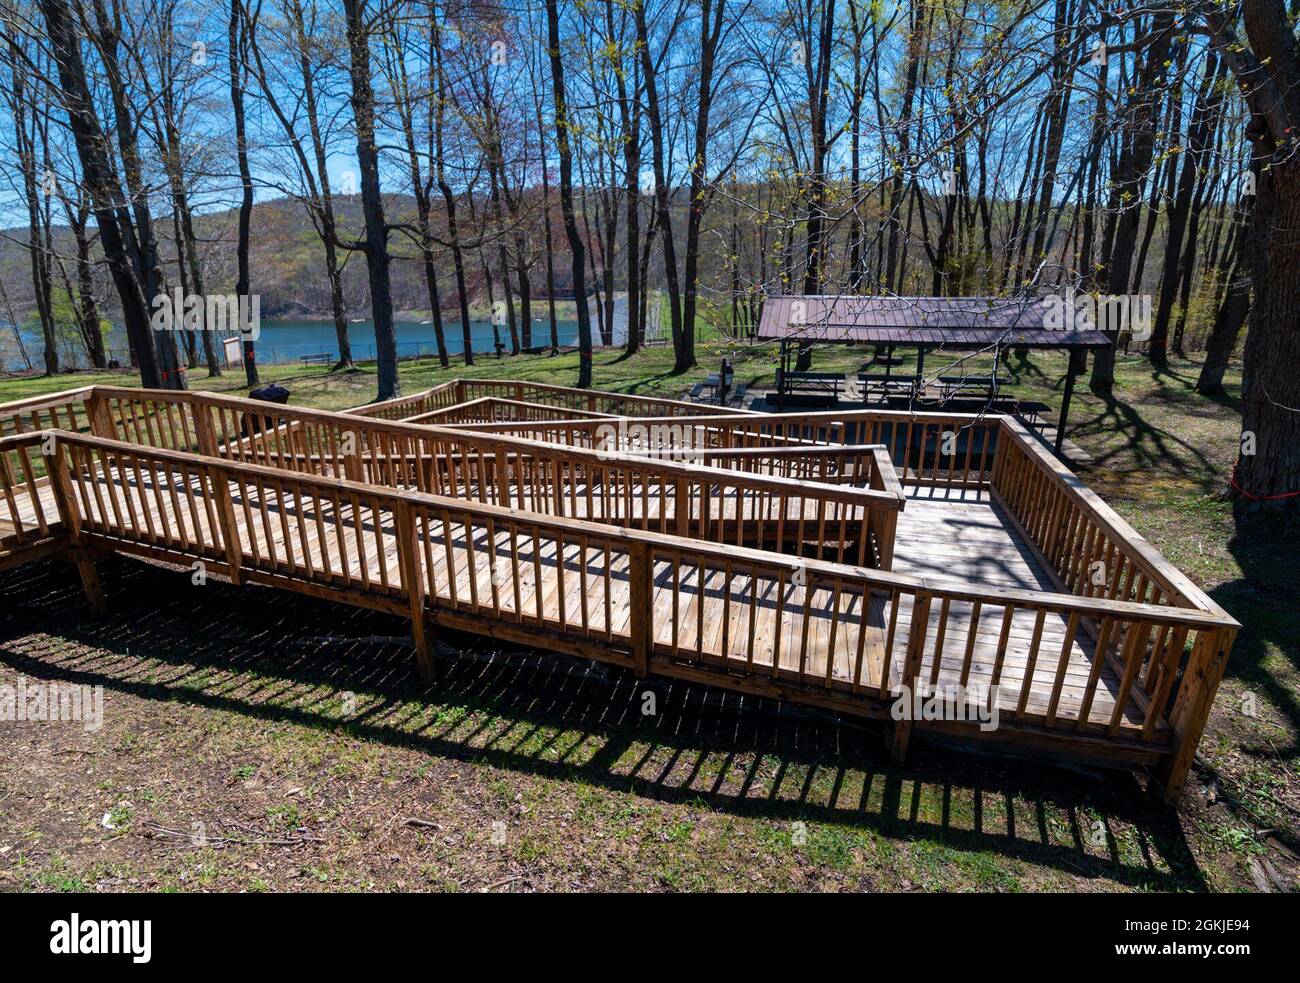 The playground and picnic areas will reopen May 28, 2021, at the East Branch Clarion River Lake in Wilcox, Pennsylvania. The U.S. Army Corps of Engineers Pittsburgh District will host a ribbon-cutting ceremony followed by an open house event at the East Branch Clarion River Lake on May 27. The reopening celebrates the dam’s return to normal operations and its continued ability to reduce floods, improve downstream water quality and supports the environmental ecosystem. Stock Photo